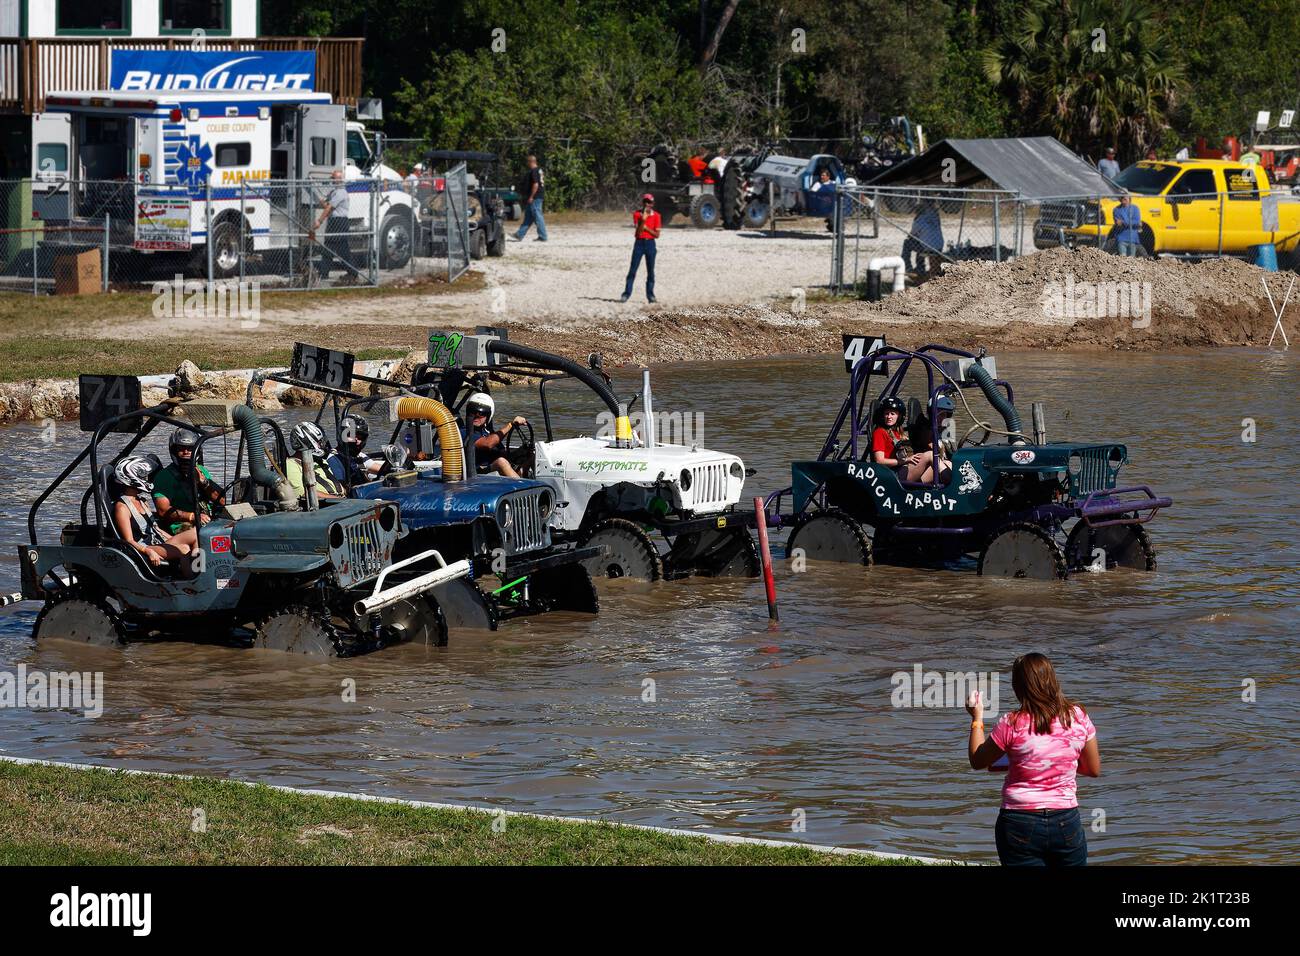 swamp buggies lined up, in water, starting race, vehicle sport, fast, contestants wear helmets, jeeps, spectators, Florida Sports Park, Naples, FL Stock Photo